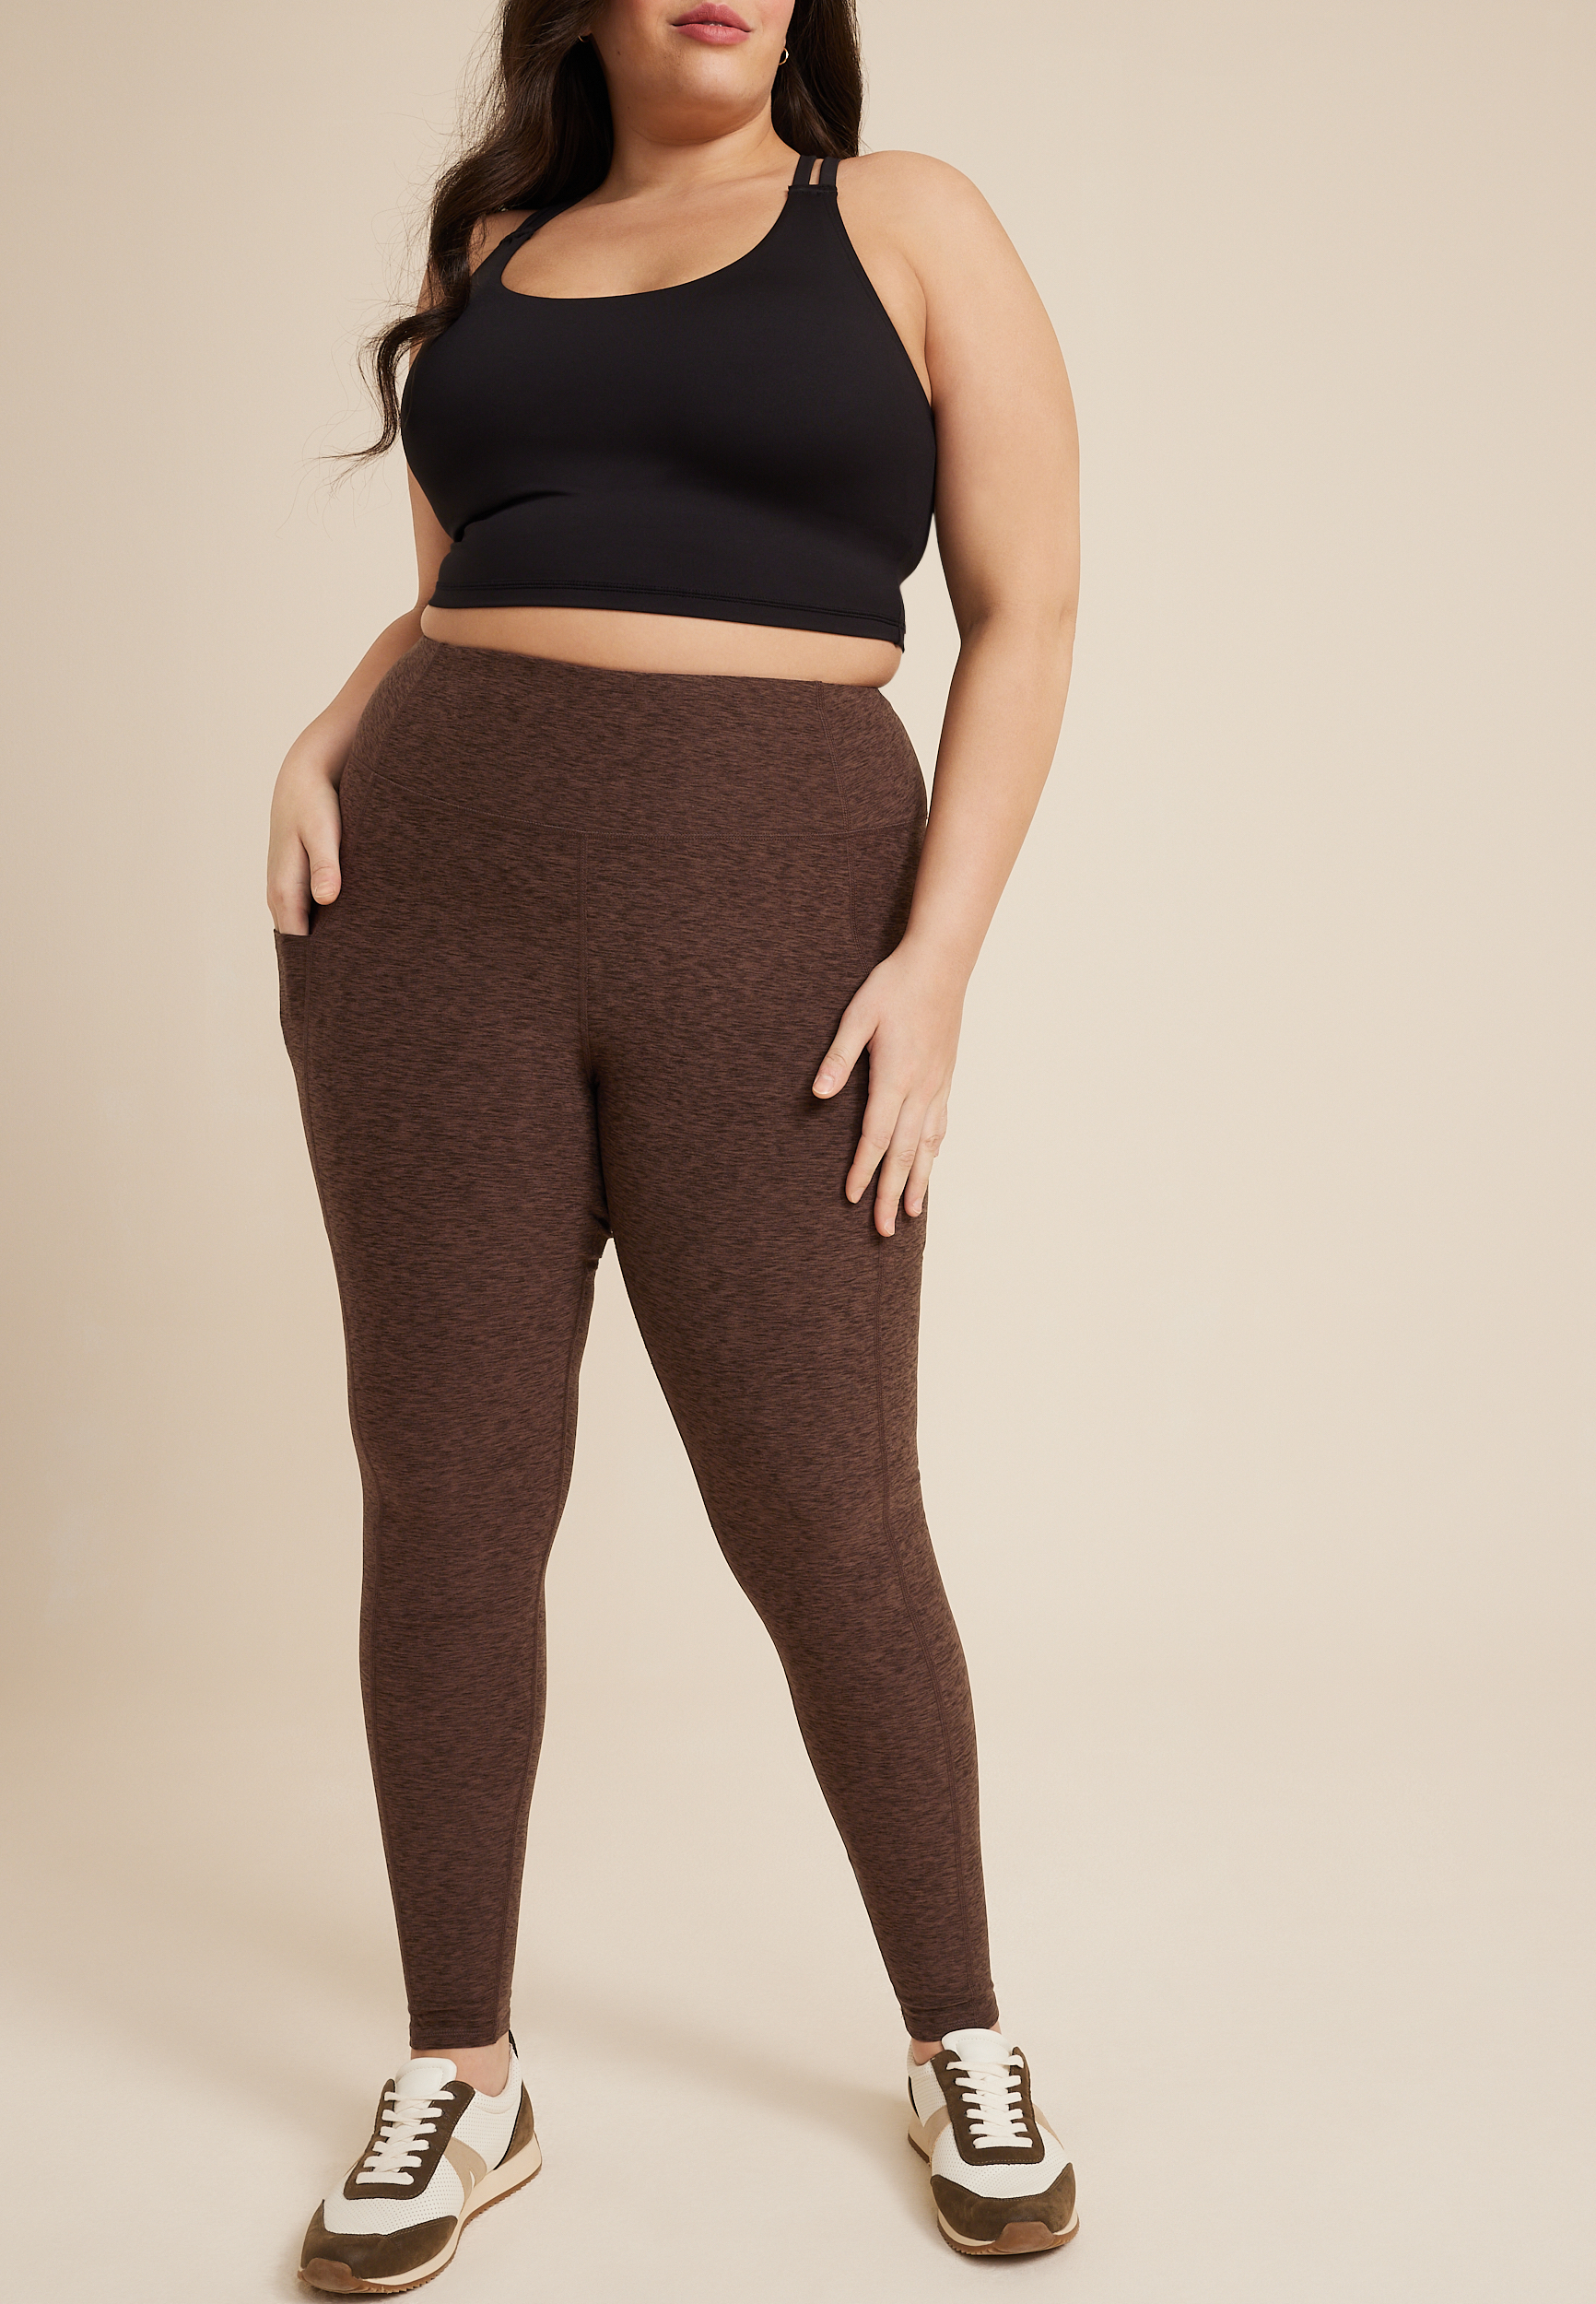 The Best Plus Size Tights That Are So Flattering: Starting at Just $10